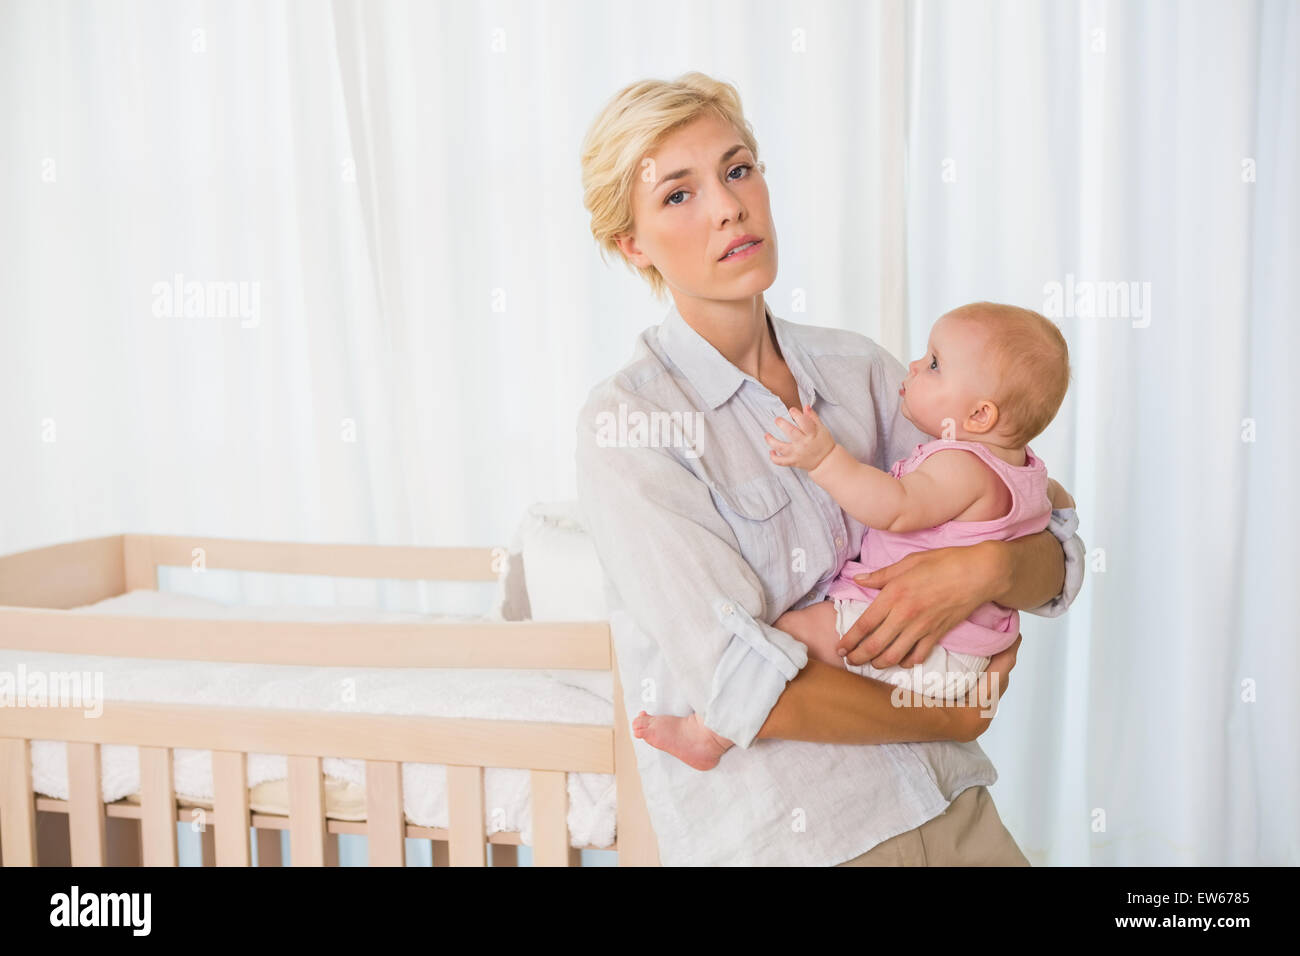 Beauitiful woman holding her baby girl Banque D'Images